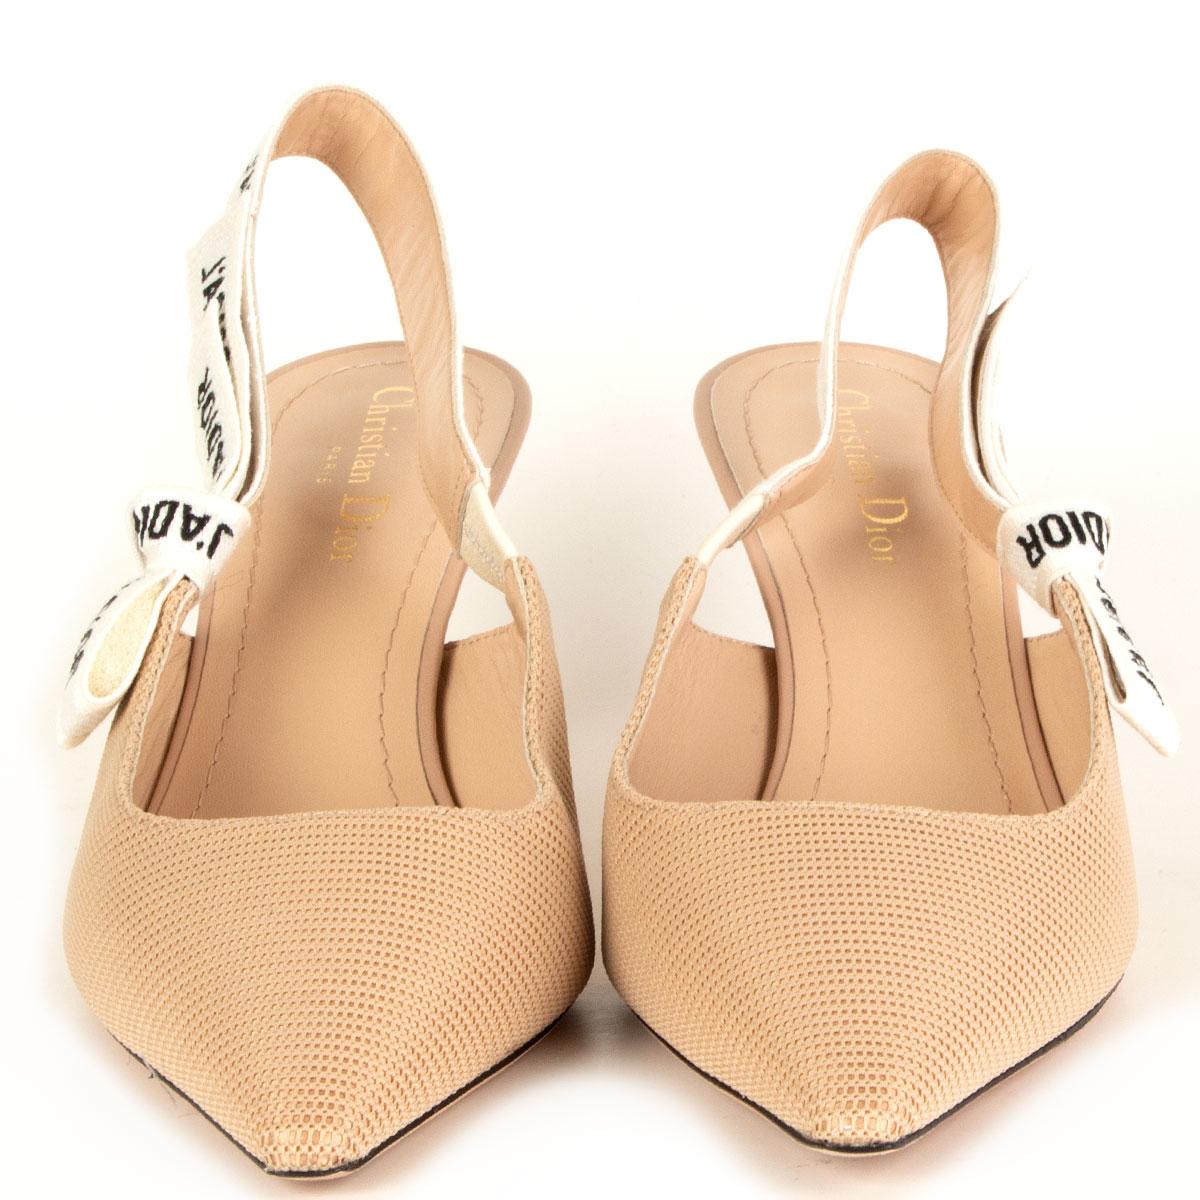 100% authentic Christian Dior J'Adior slingback pumps in nude technical fabric featuring J'ADIOR' two-tone embroidered cotton ribbon embellished with a flat bow. Lined in nude lambskin. Brand new. Come with dust bag. 

Measurements
Imprinted